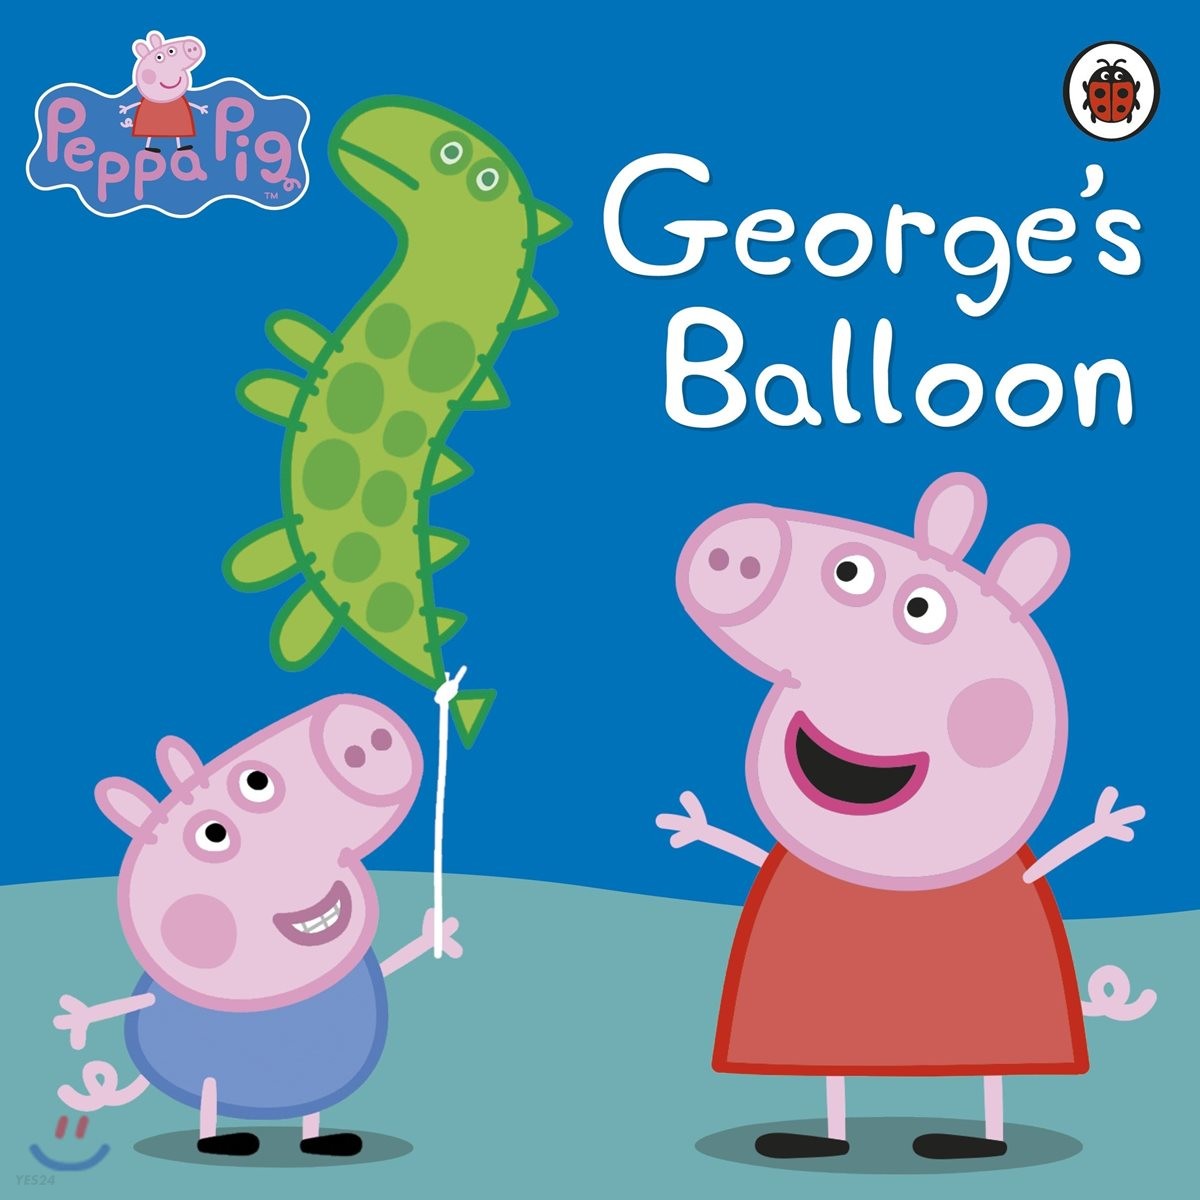 Georges Balloon